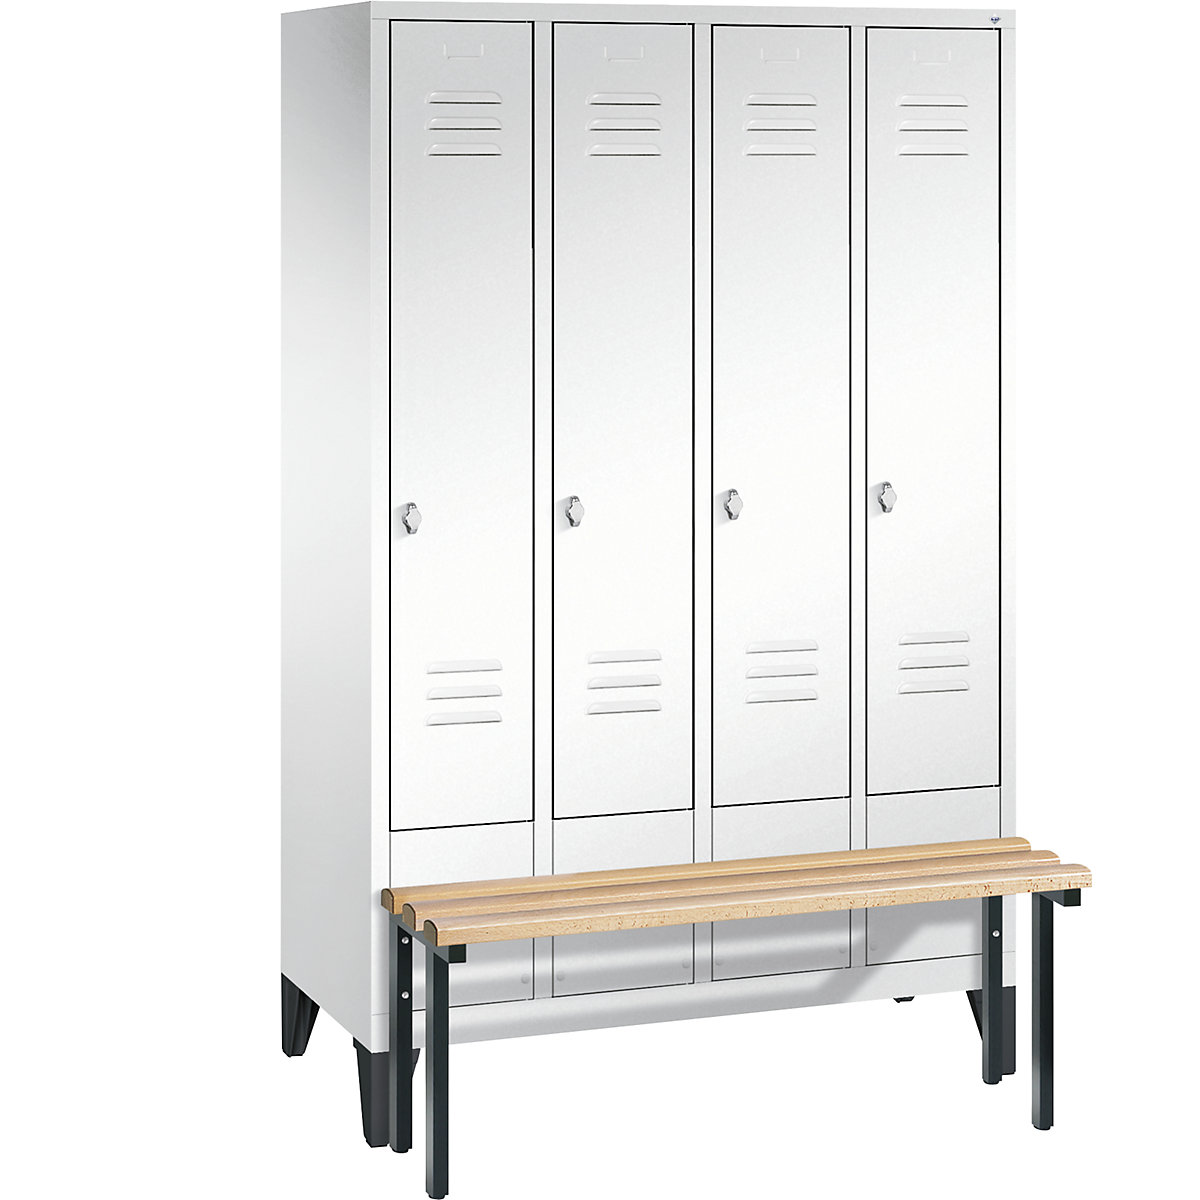 CLASSIC cloakroom locker with bench mounted in front – C+P, 4 compartments, compartment width 300 mm, traffic white-9